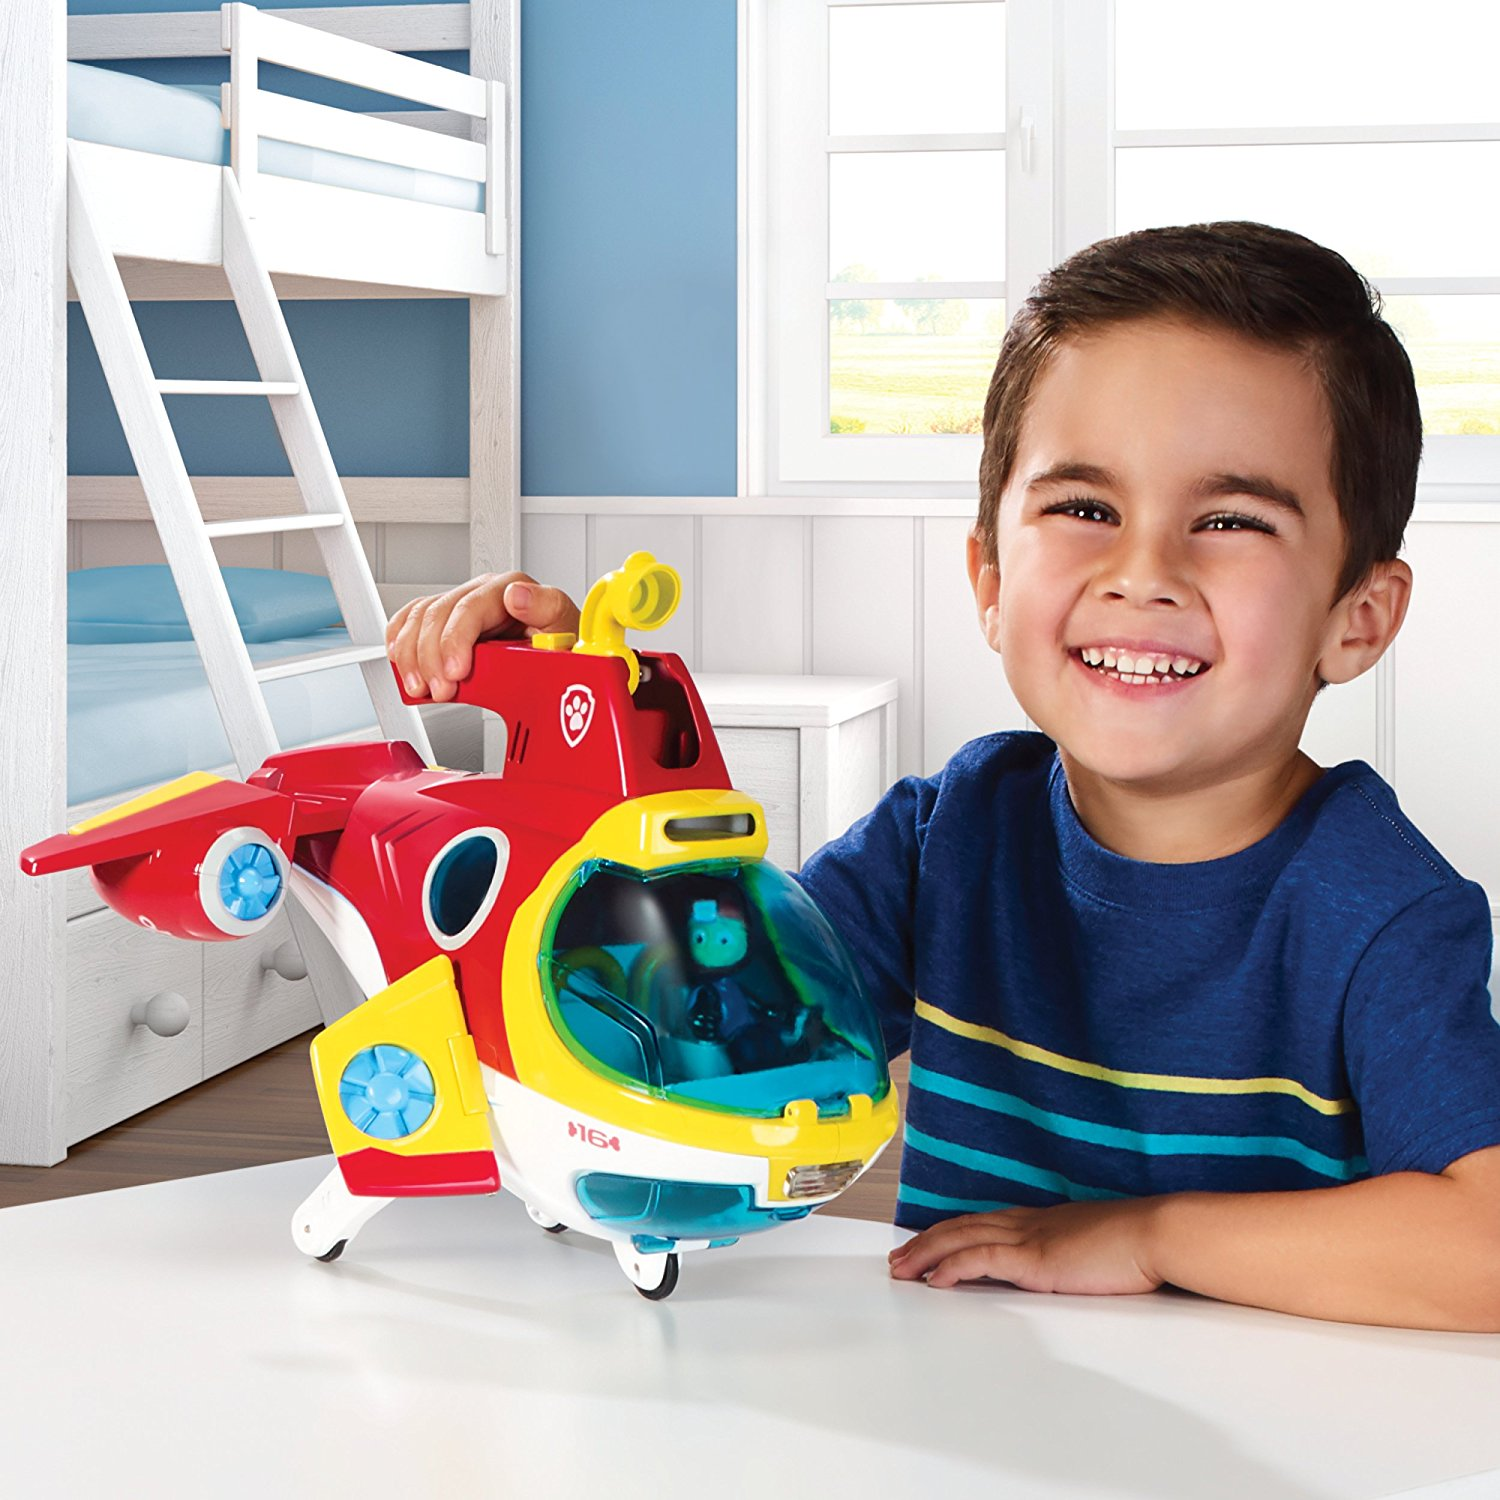 Paw Patrol Sub Patroller Transforming Vehicle with Lights/Sounds and Launcher Only $17.49! (BLACK FRIDAY PRICE!)